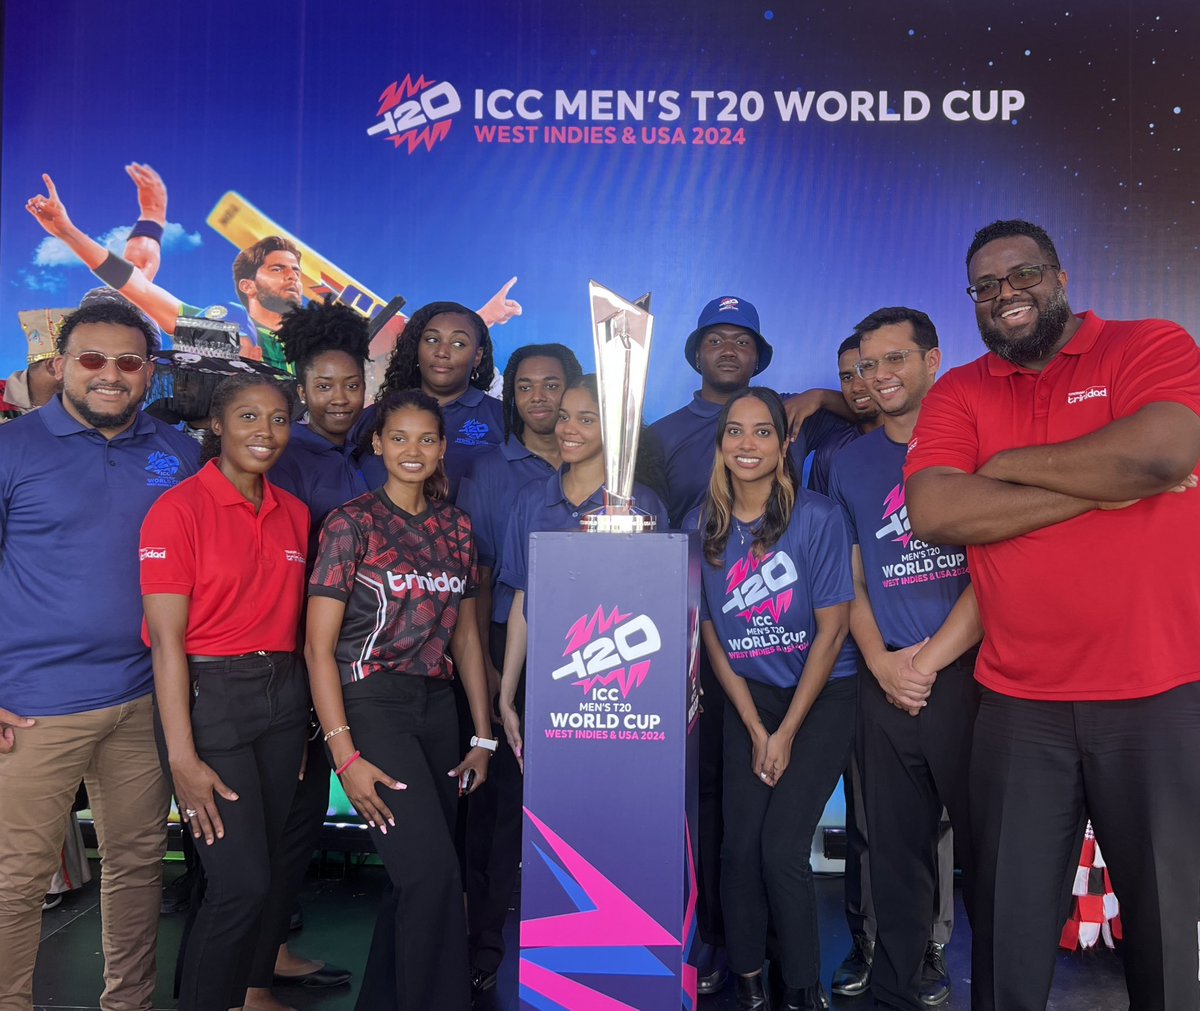 The #TourismTrinidad team was on hand today to support the ICC T20 World Cup Trophy Tour - Trinidad experience!

Tourism Trinidad continues to prepare for the global tournament taking place June 12-26 in Trinidad and Tobago 🏏🇹🇹

@TourismTT 

#visitTrinidad #t20worldcup